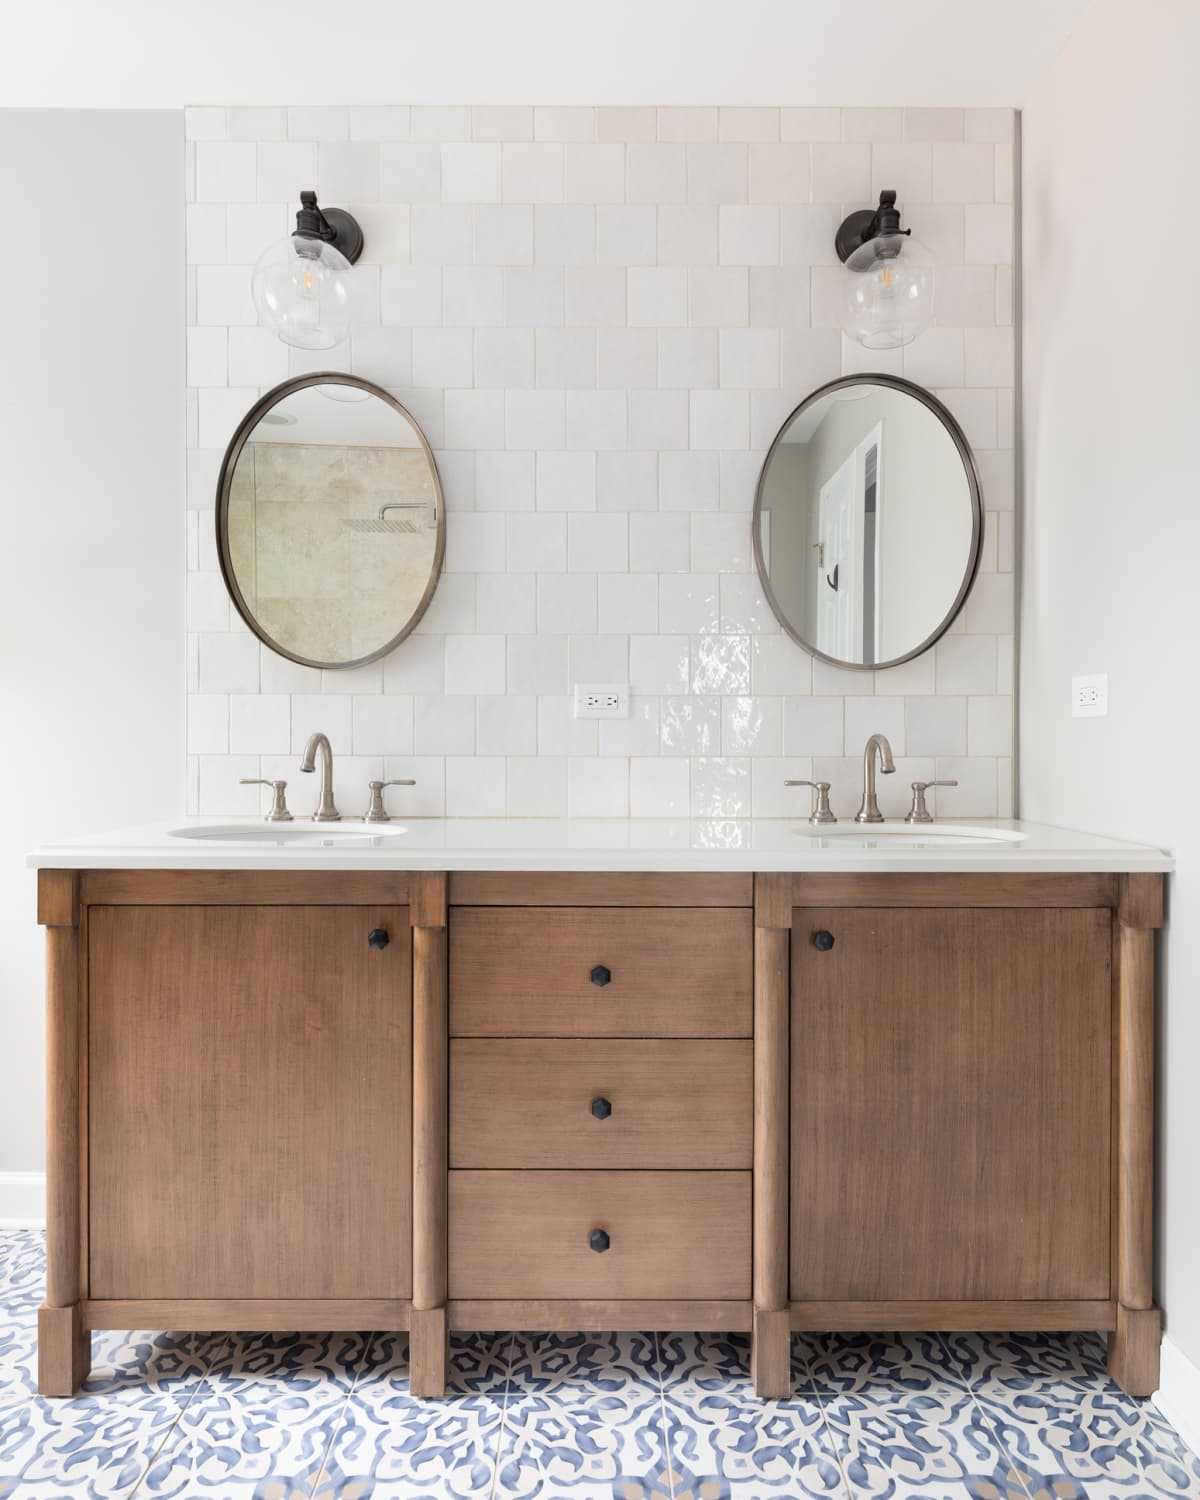 A cozy bathroom with a patterned tile floor, natural wood vanity, tiled backsplash, and lights mounted above circular mirrors.